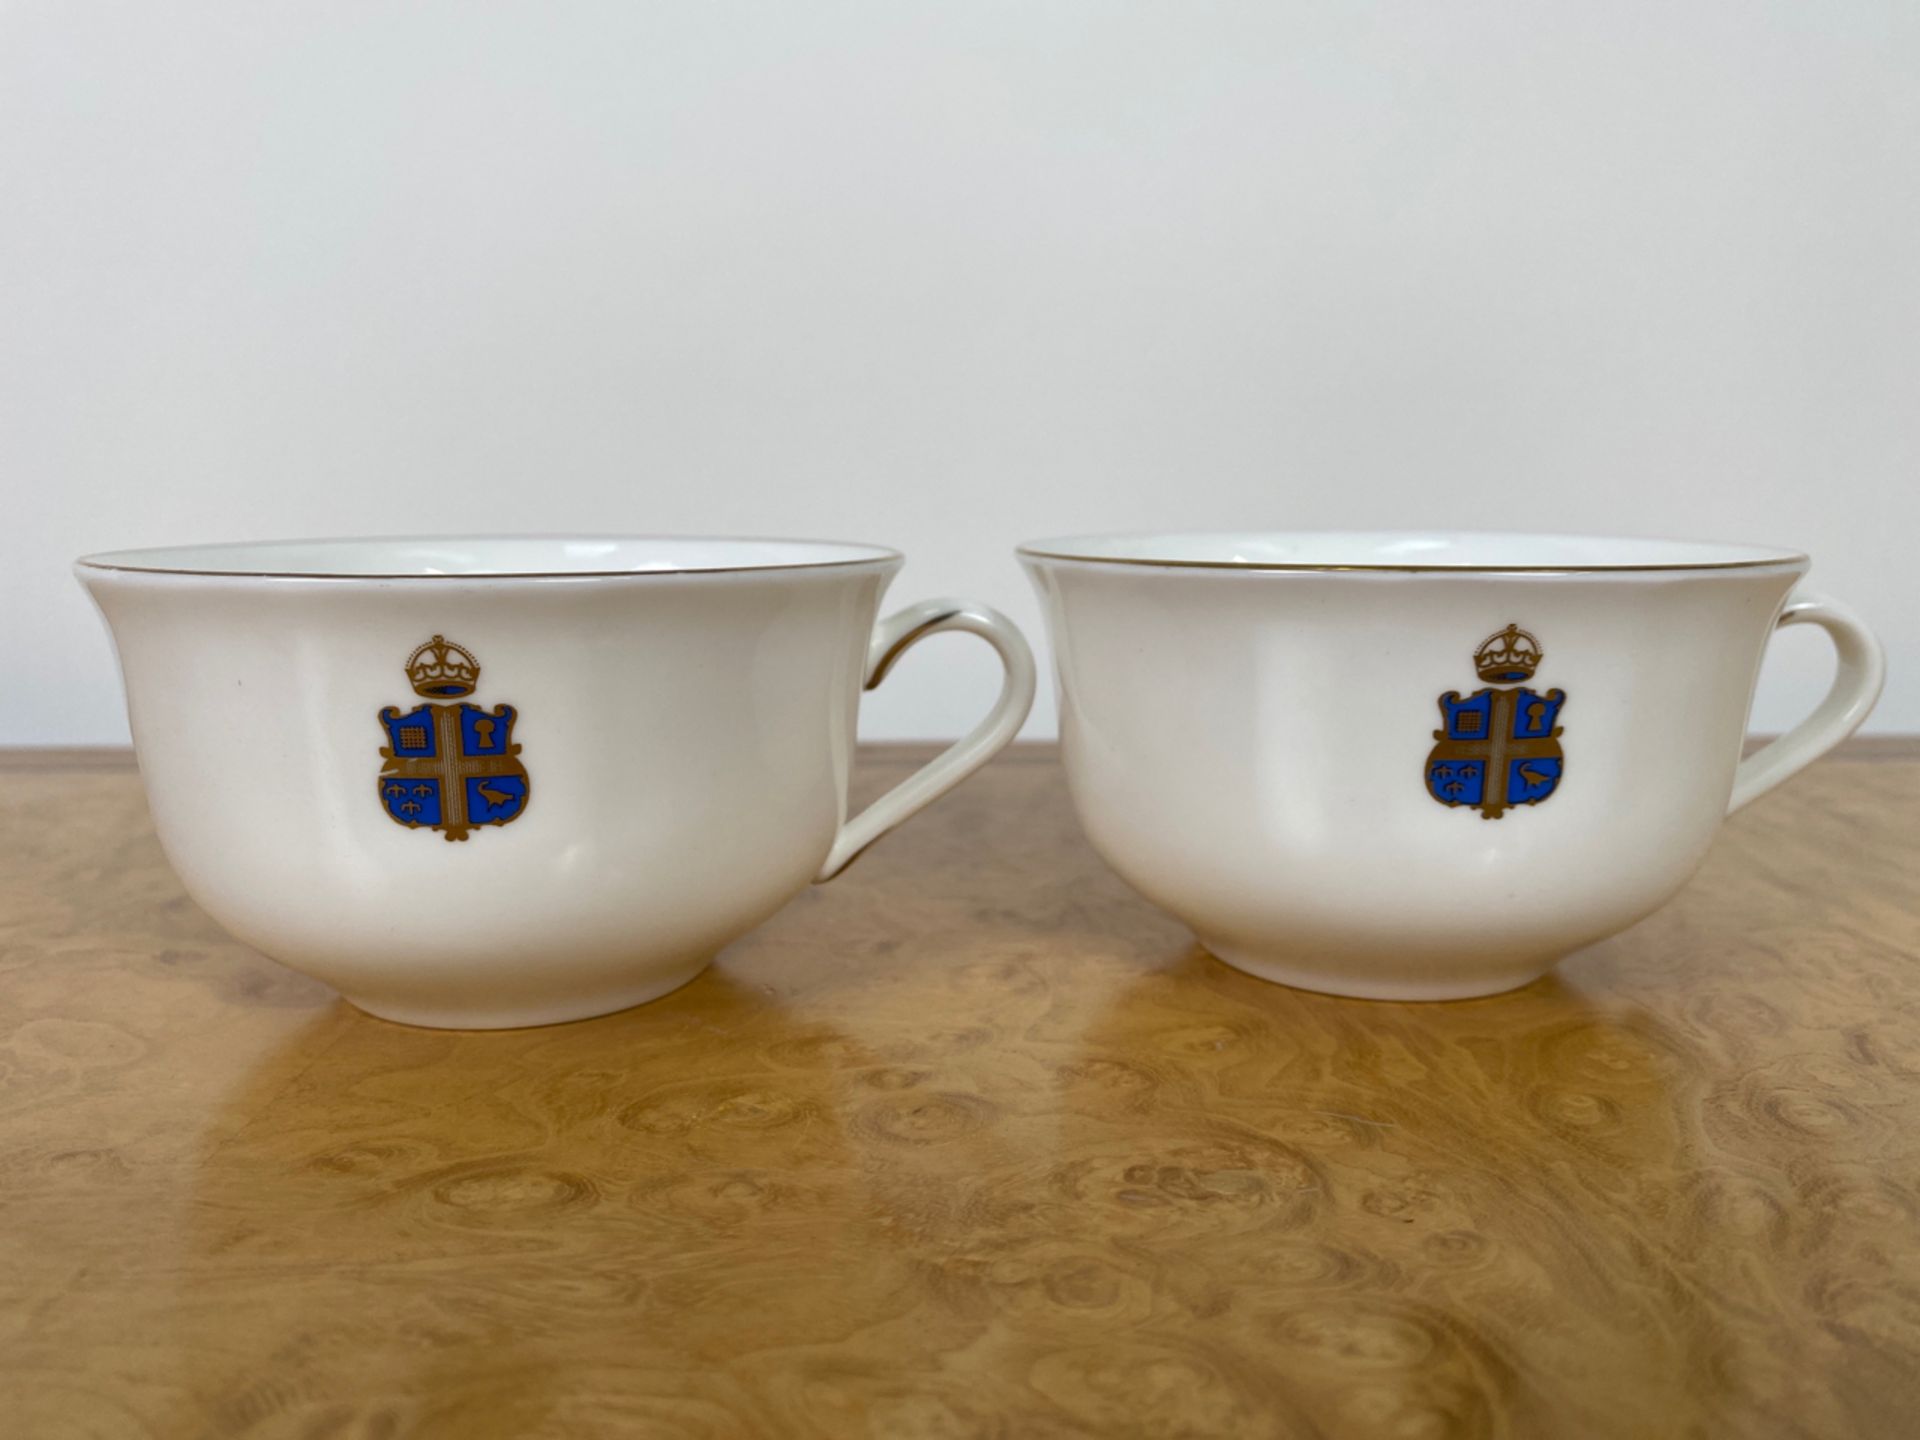 Set of Crested Crockery for Claridge's by Chommette 1884 - Image 13 of 36